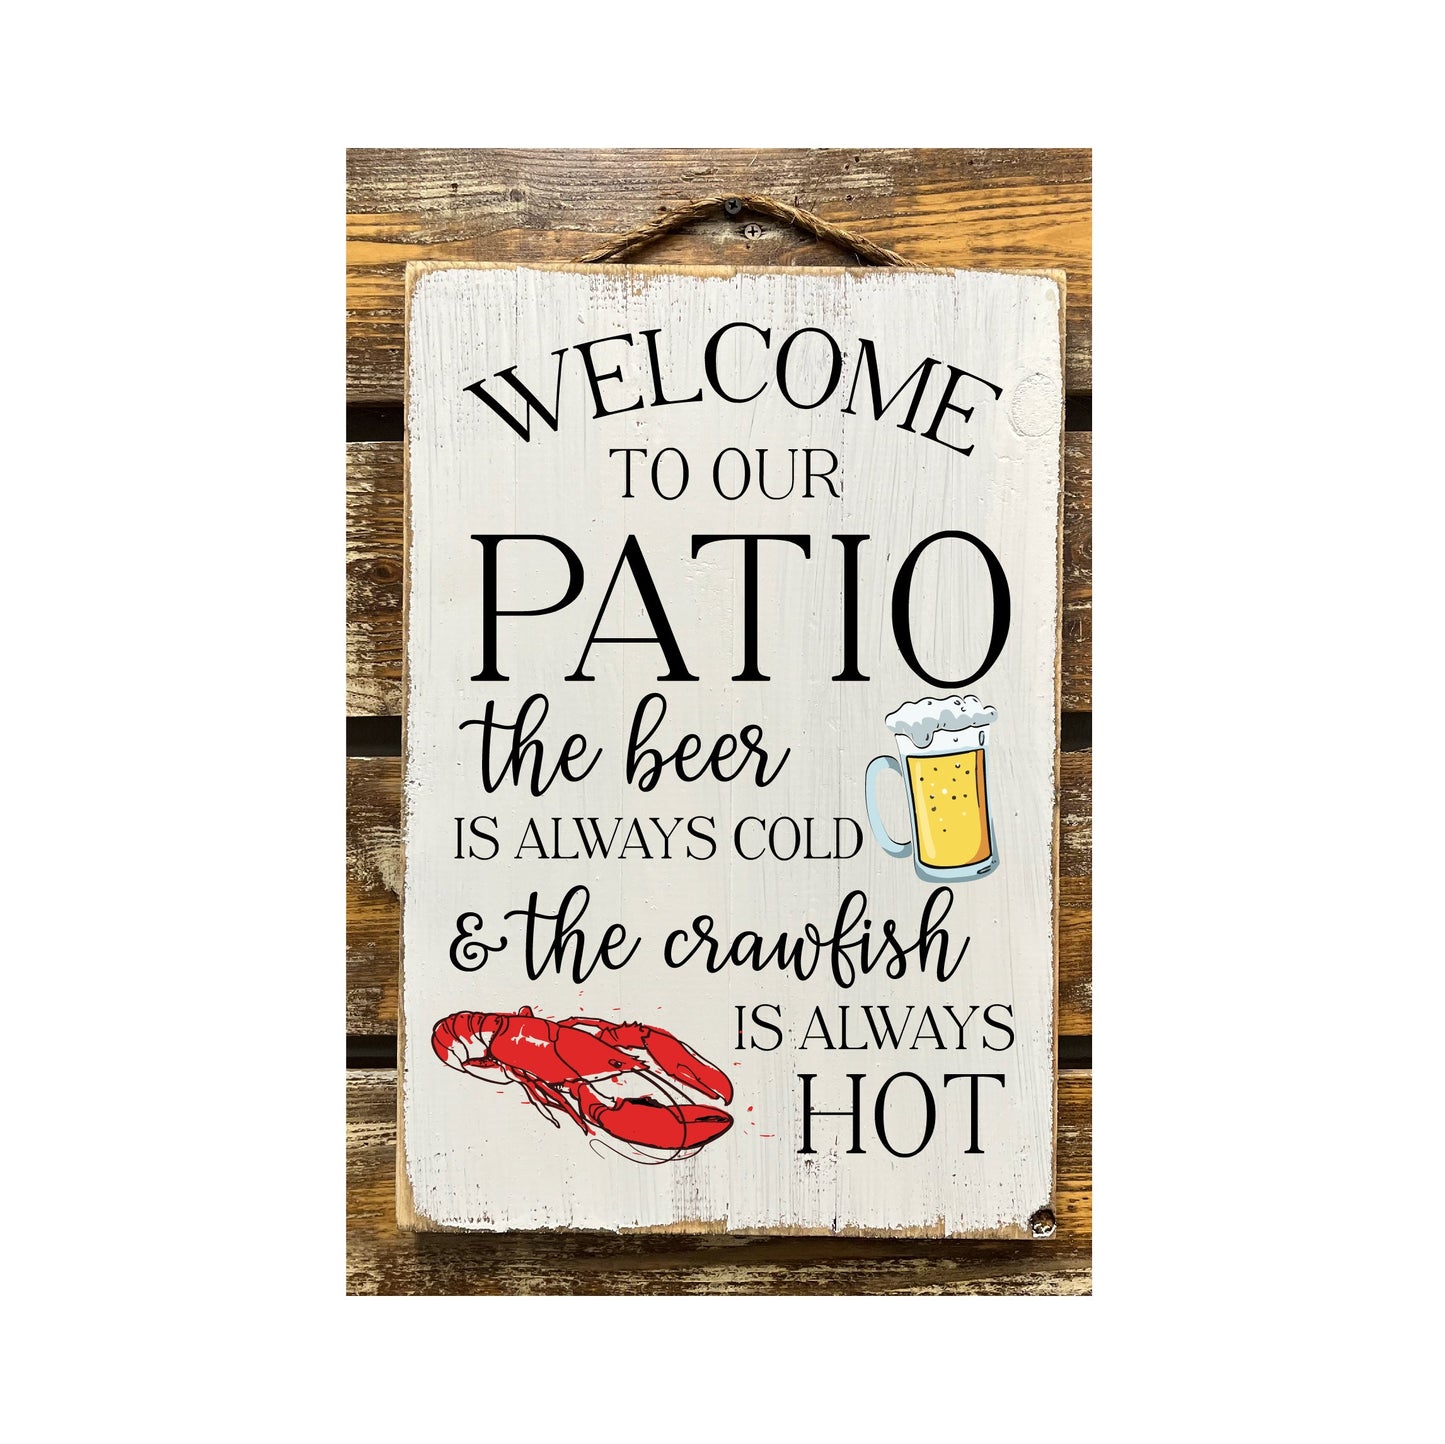 Welcome To Our Patio The Crawfish Is Always Hot...